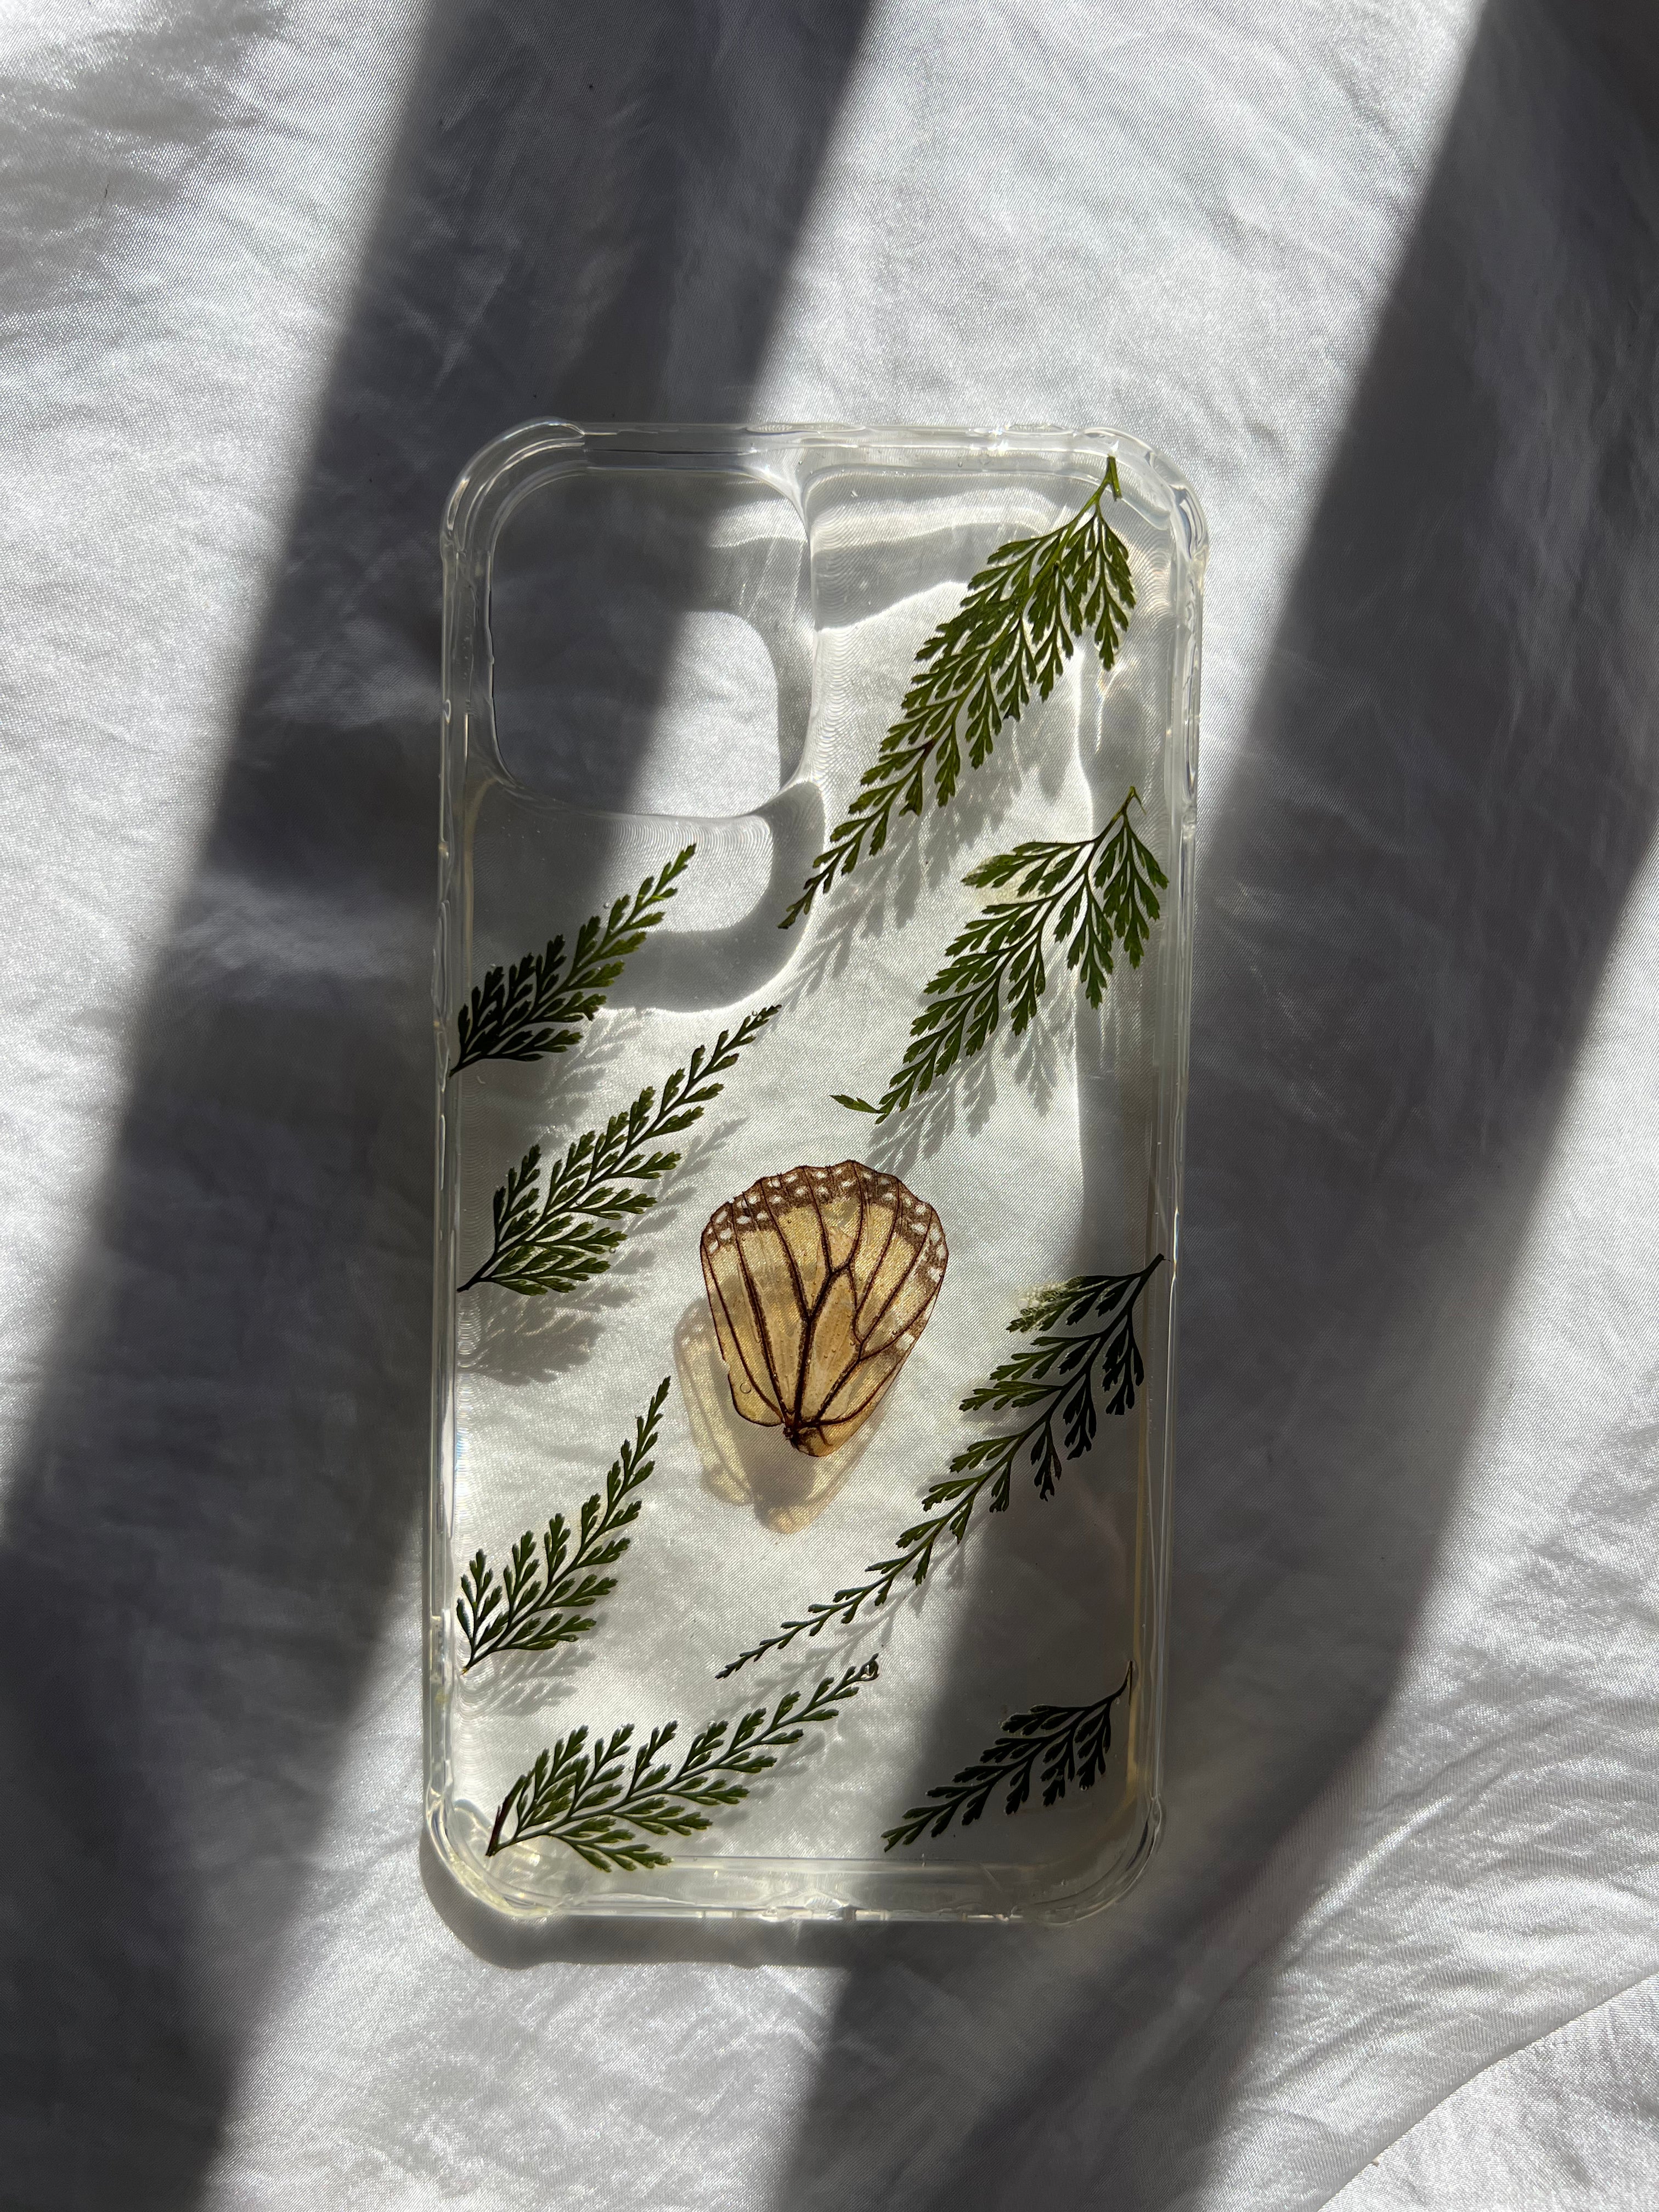 pressed flower phone case, botanical phone case, pressed flower art, handmade phone case, real pressed flowers, australian made, botanical art, pressed flower artist, floral art, botanical preservation, resin and flowers, flowers in resin, phone accessories, iphone 12 pro max, monarch butterfly wing, butterfly preservation, gold coast, tweed heads, byron bay, ferns